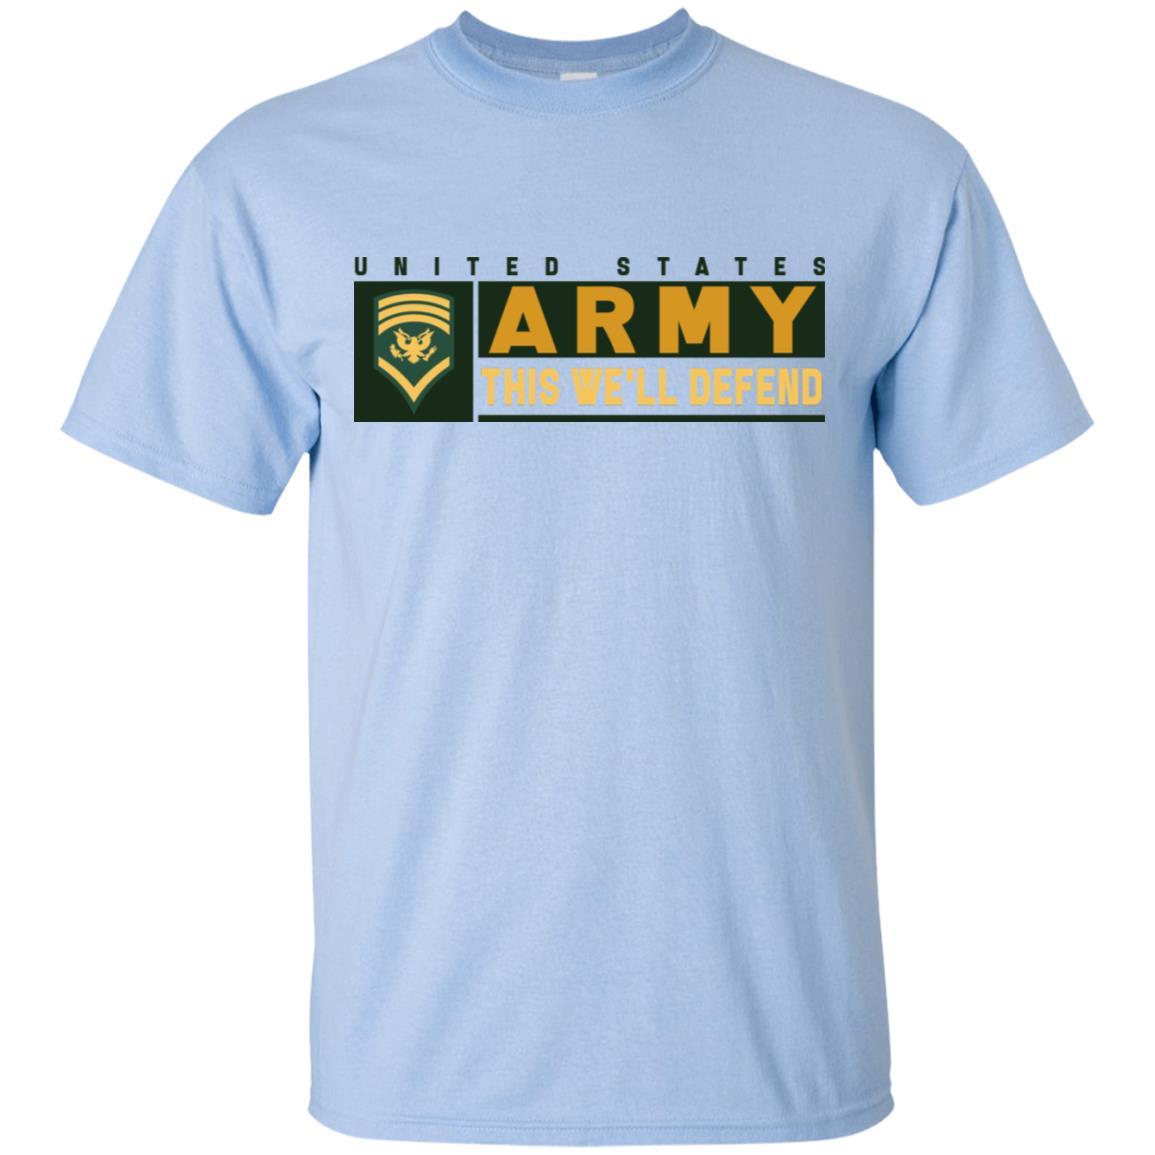 US Army E-8 SPC This We Will Defend T-Shirt On Front For Men-TShirt-Army-Veterans Nation